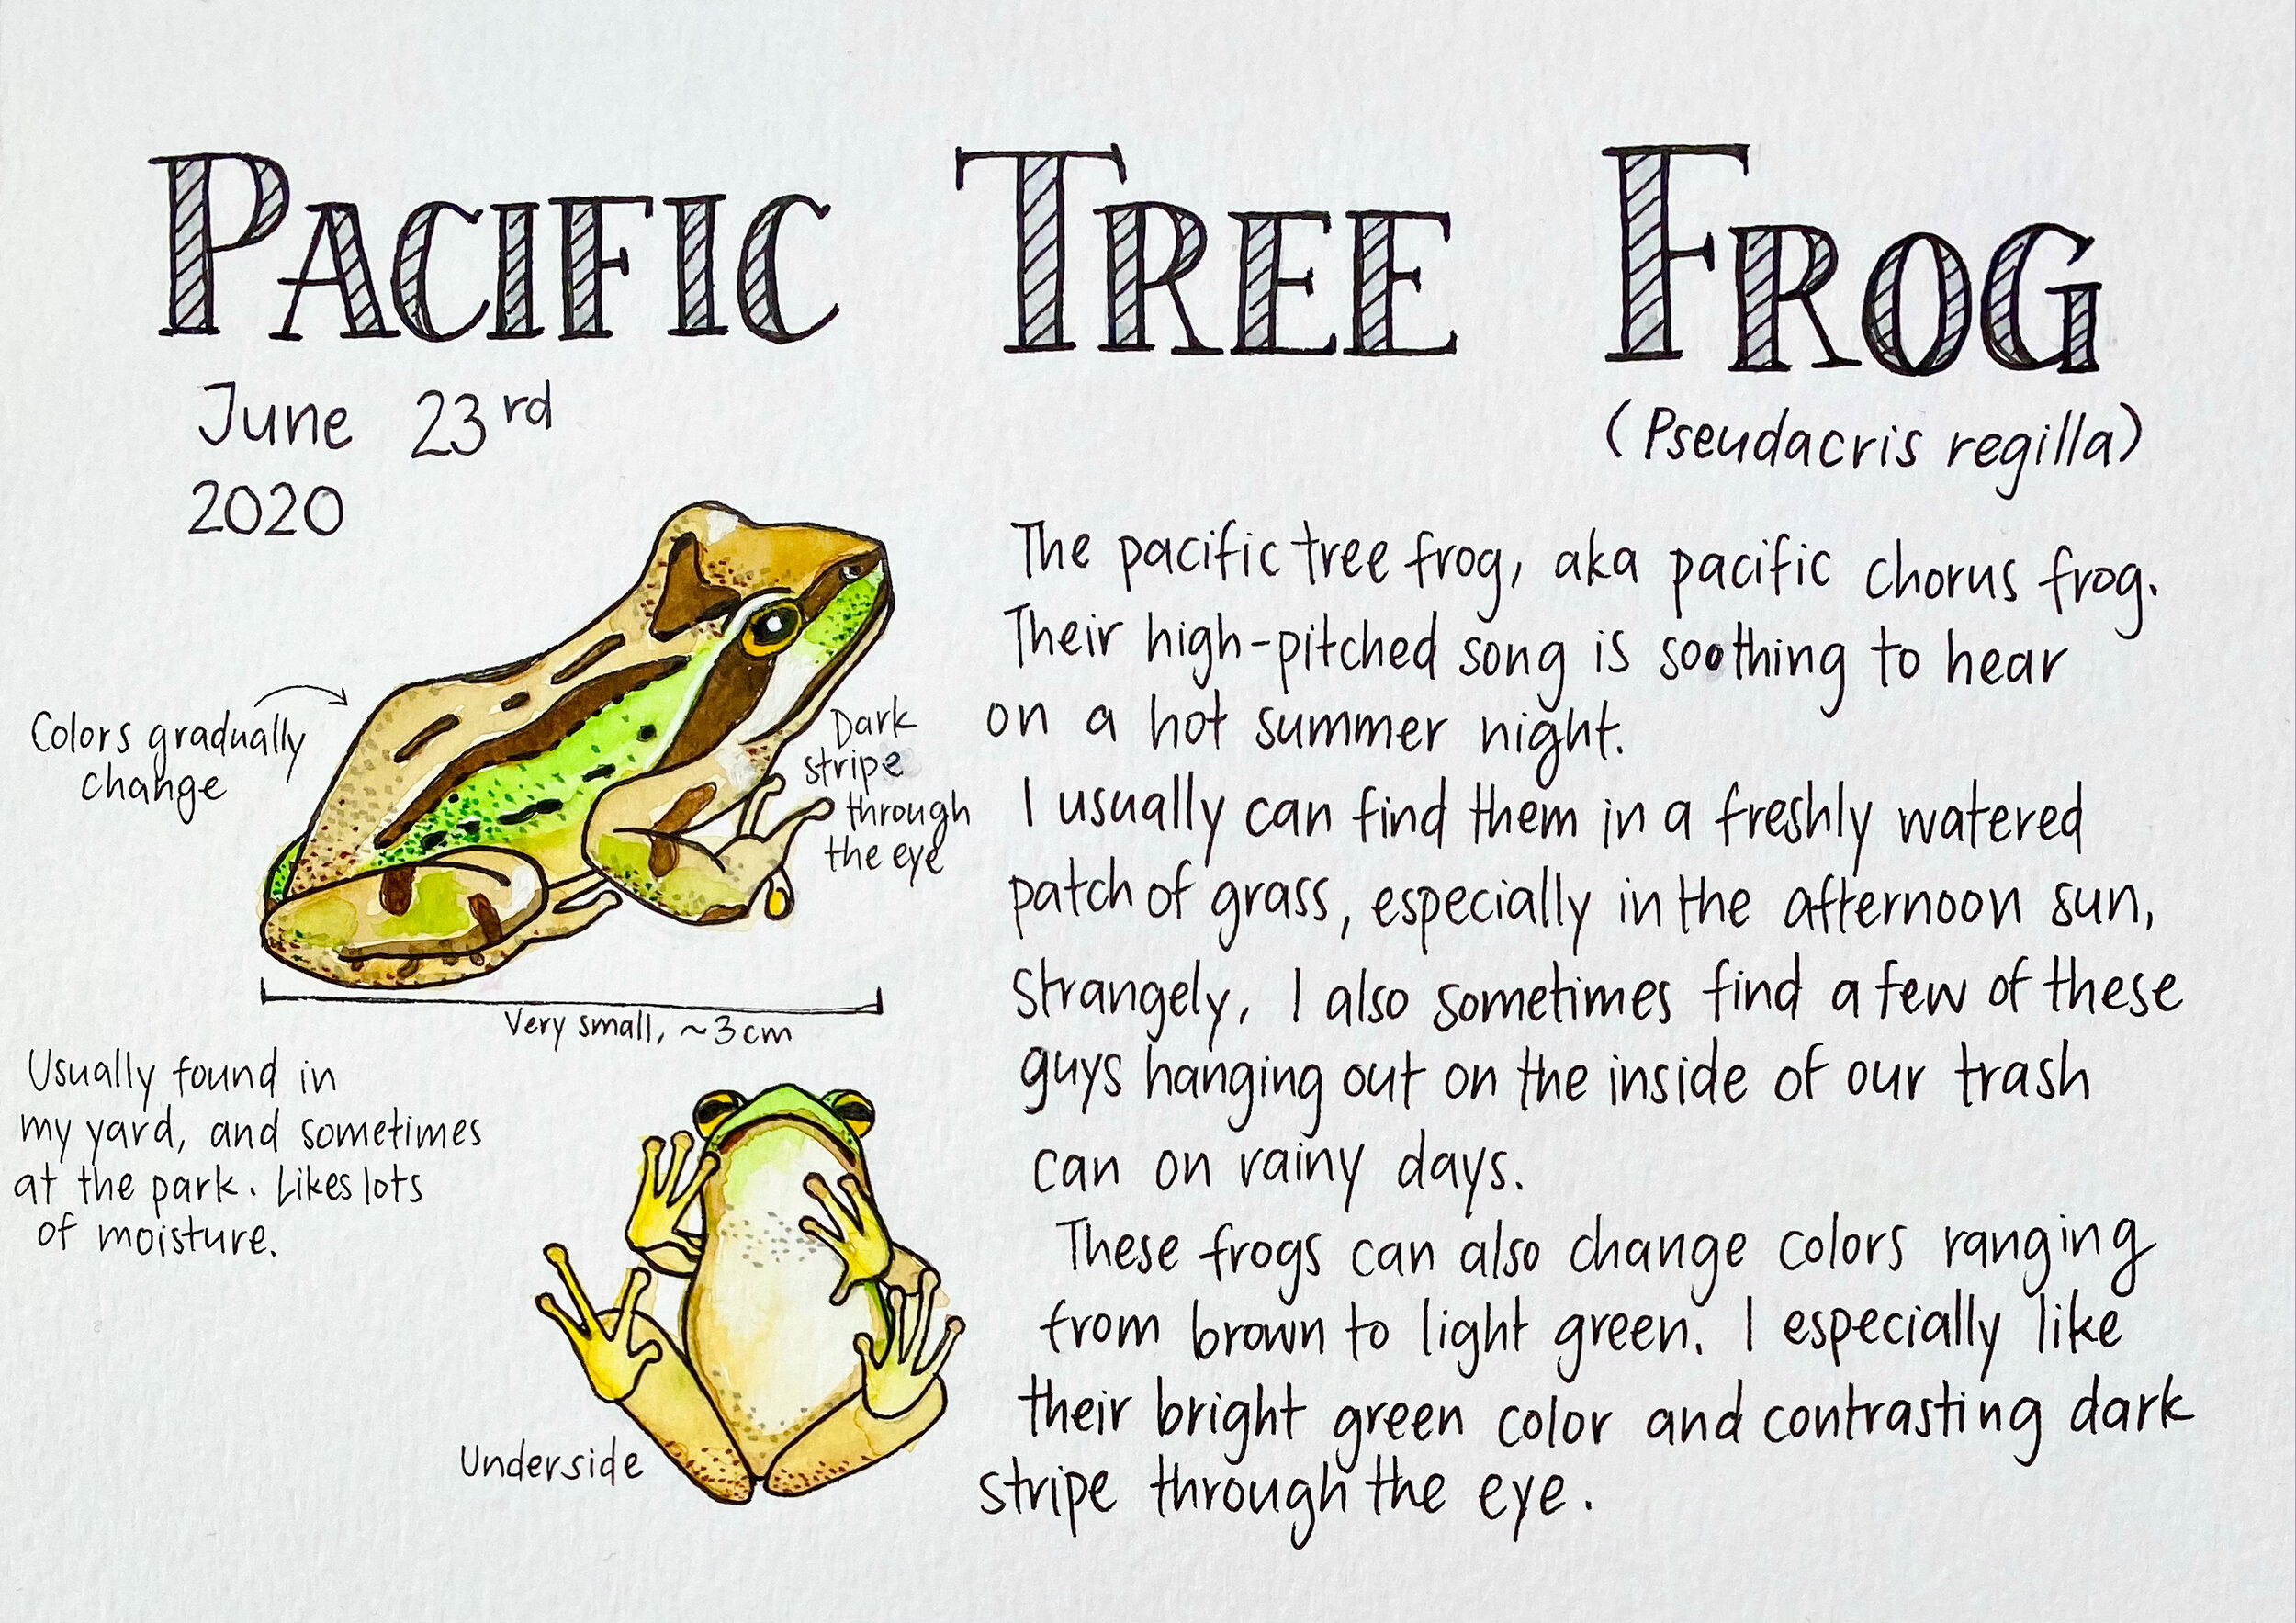 Pacific Tree Frog by Lilia Freire - 2nd Place to Grades 9-12